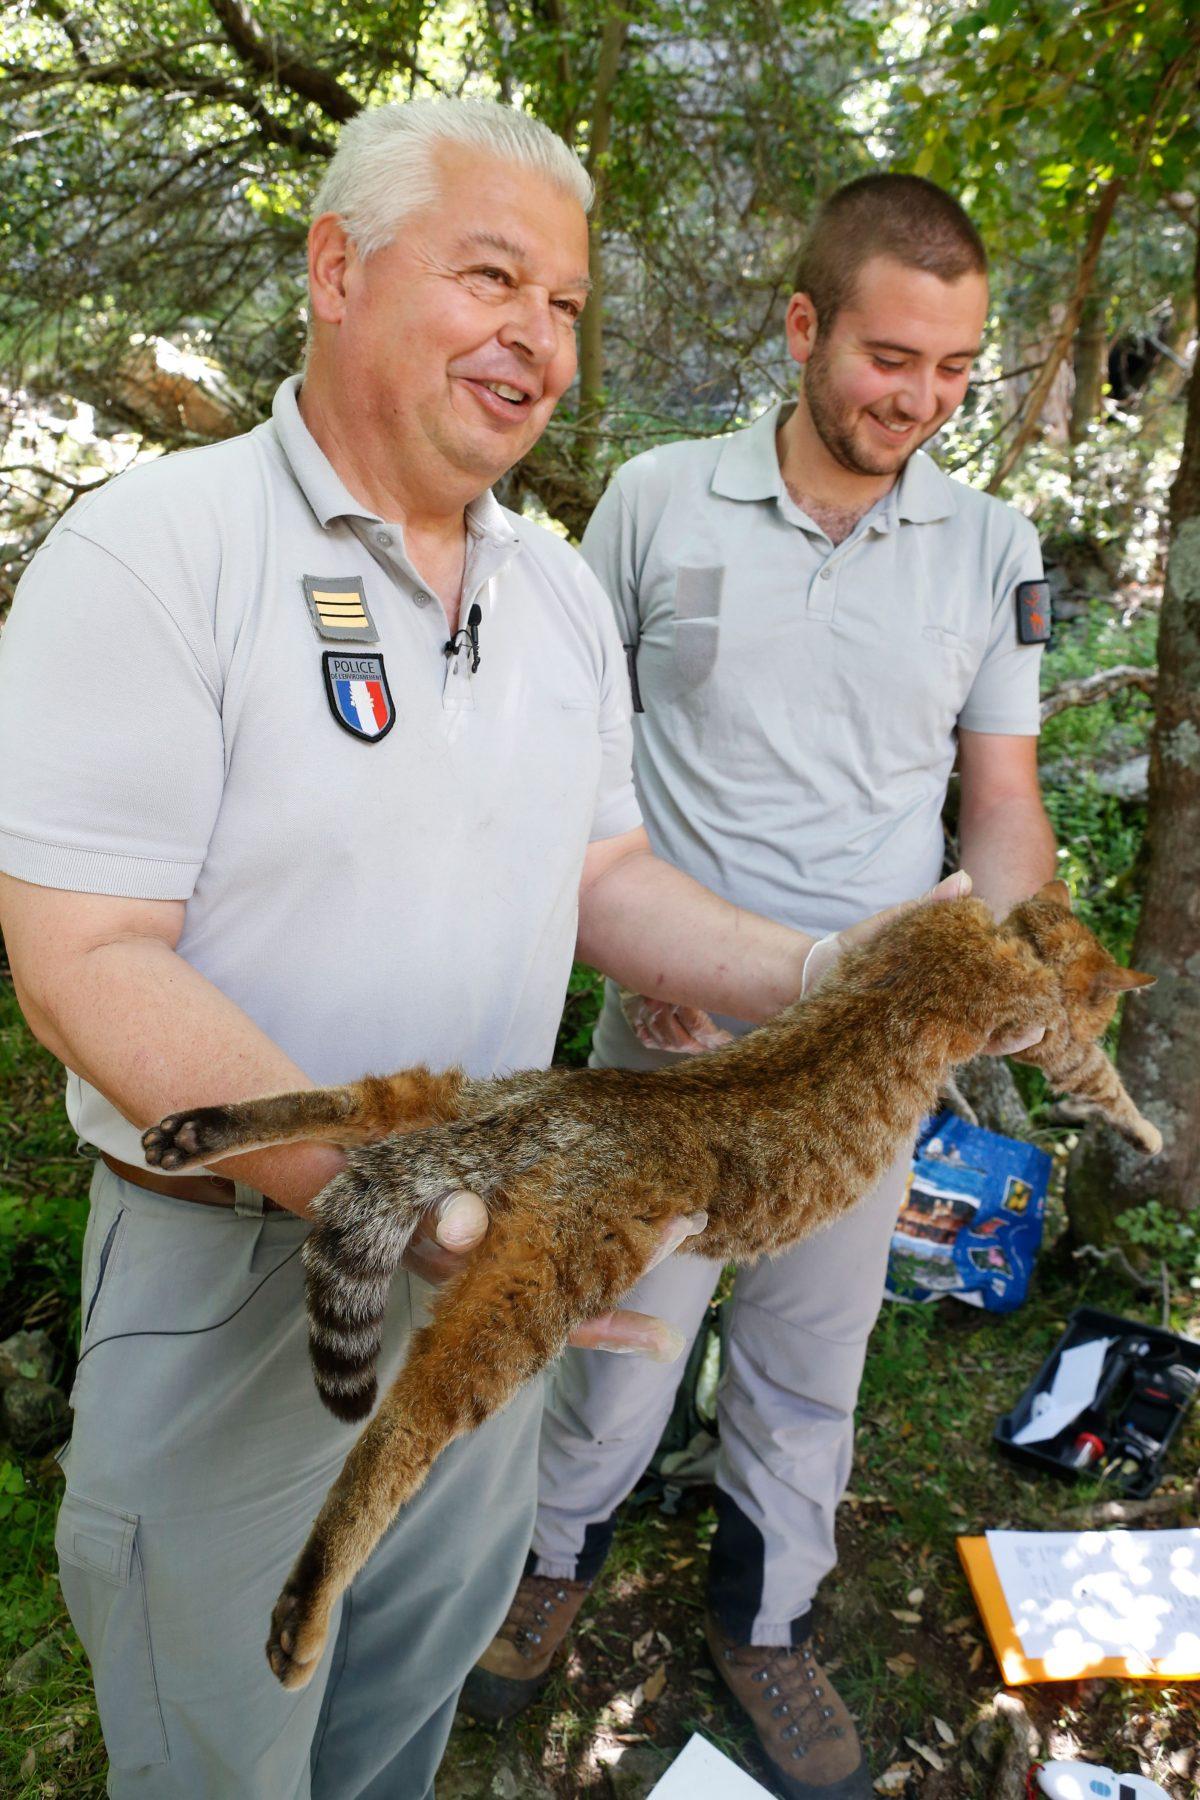 Employees with the National Office for Hunting and Wildlife measure a "ghjattu-volpe," or cat-fox, in Asco on the French Mediterranean island of Corsica on June 12, 2019. (Pascal Pochard-Casabianca/AFP/Getty Images)